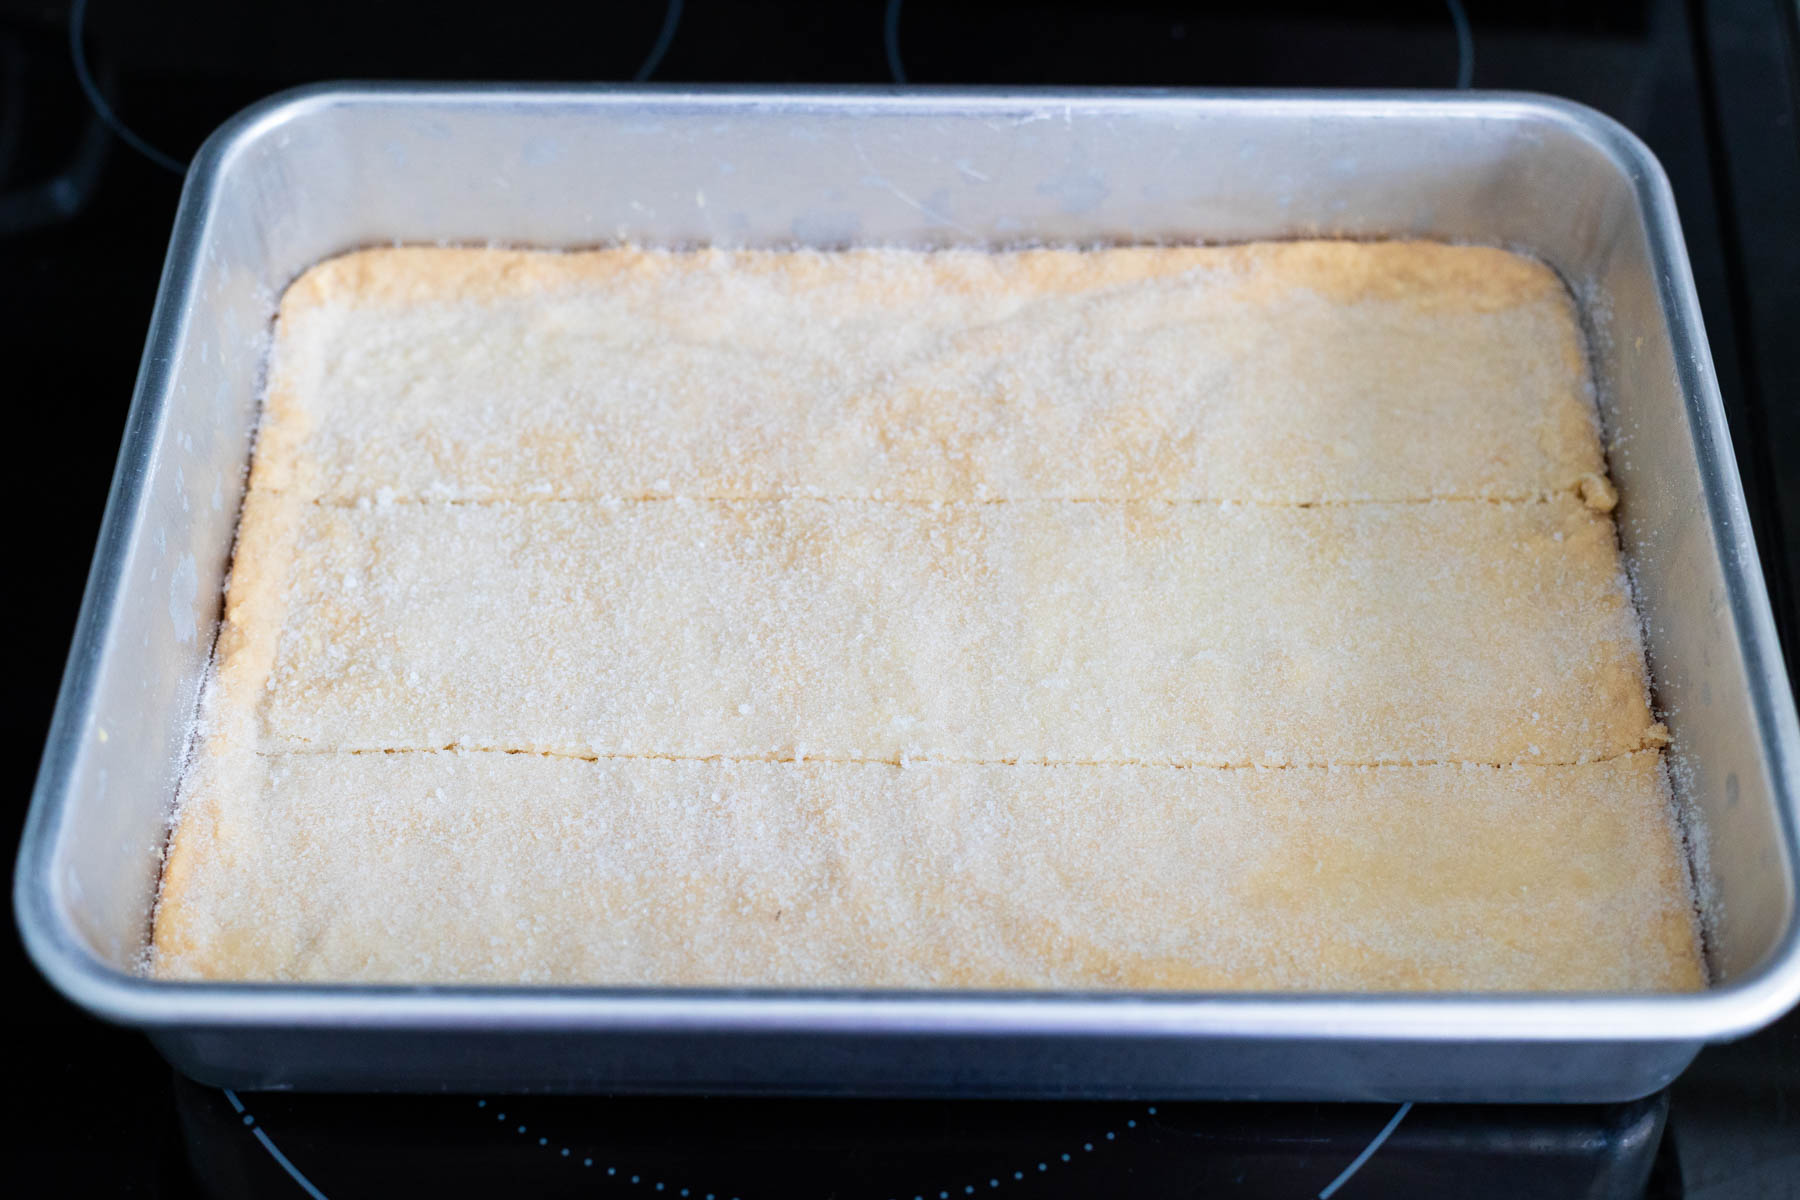 The pan of baked shortbread has two slices dividing it lengthwise into thirds.